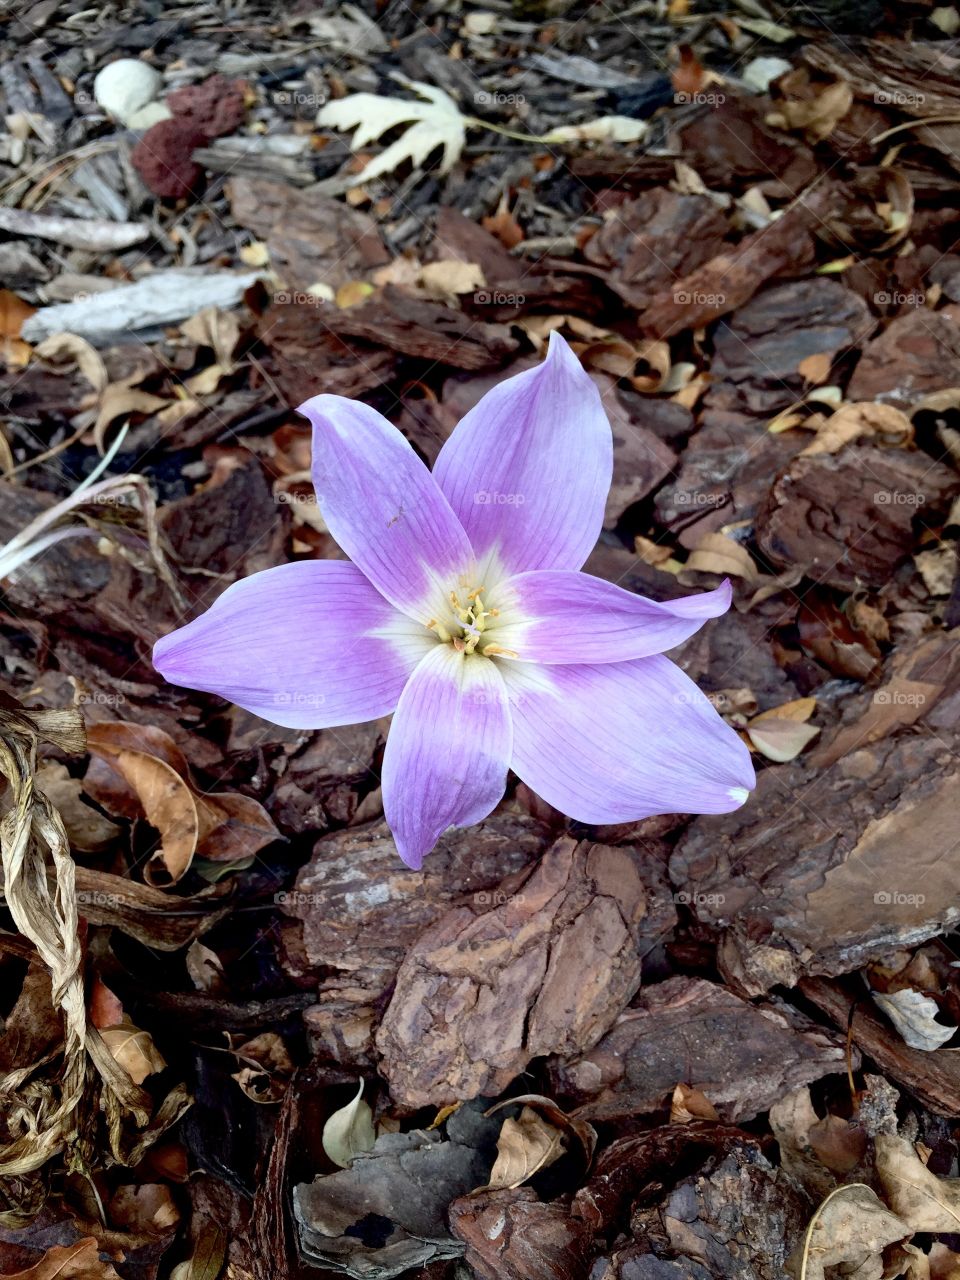 There, in the middle of nothing I saw this one purple shadow out of the corner of my eye and I thought, how magnificent is it that even amongst all the dirt and darkness could emerge such a beautiful flower.  Nature never seizes to amaze me 🌾✨